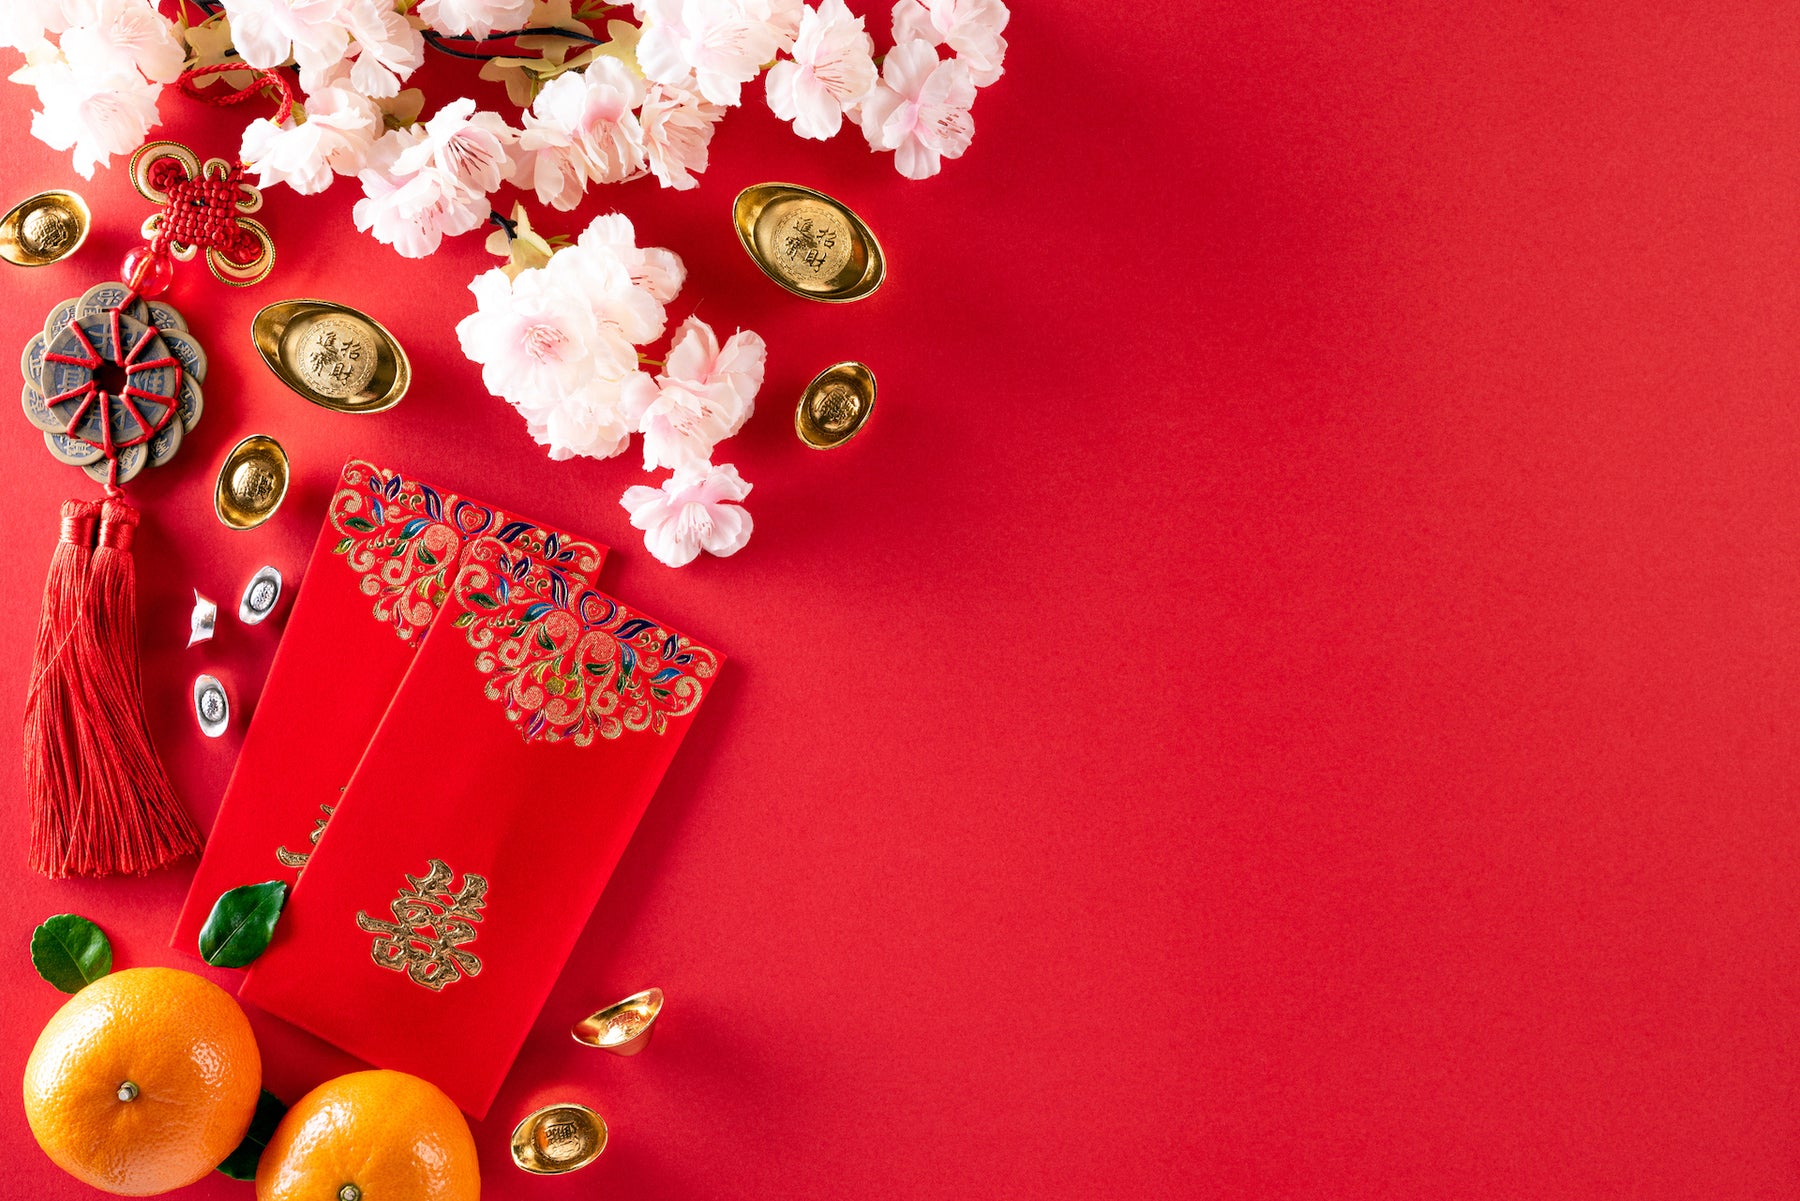 Chinese New Year red envelope 